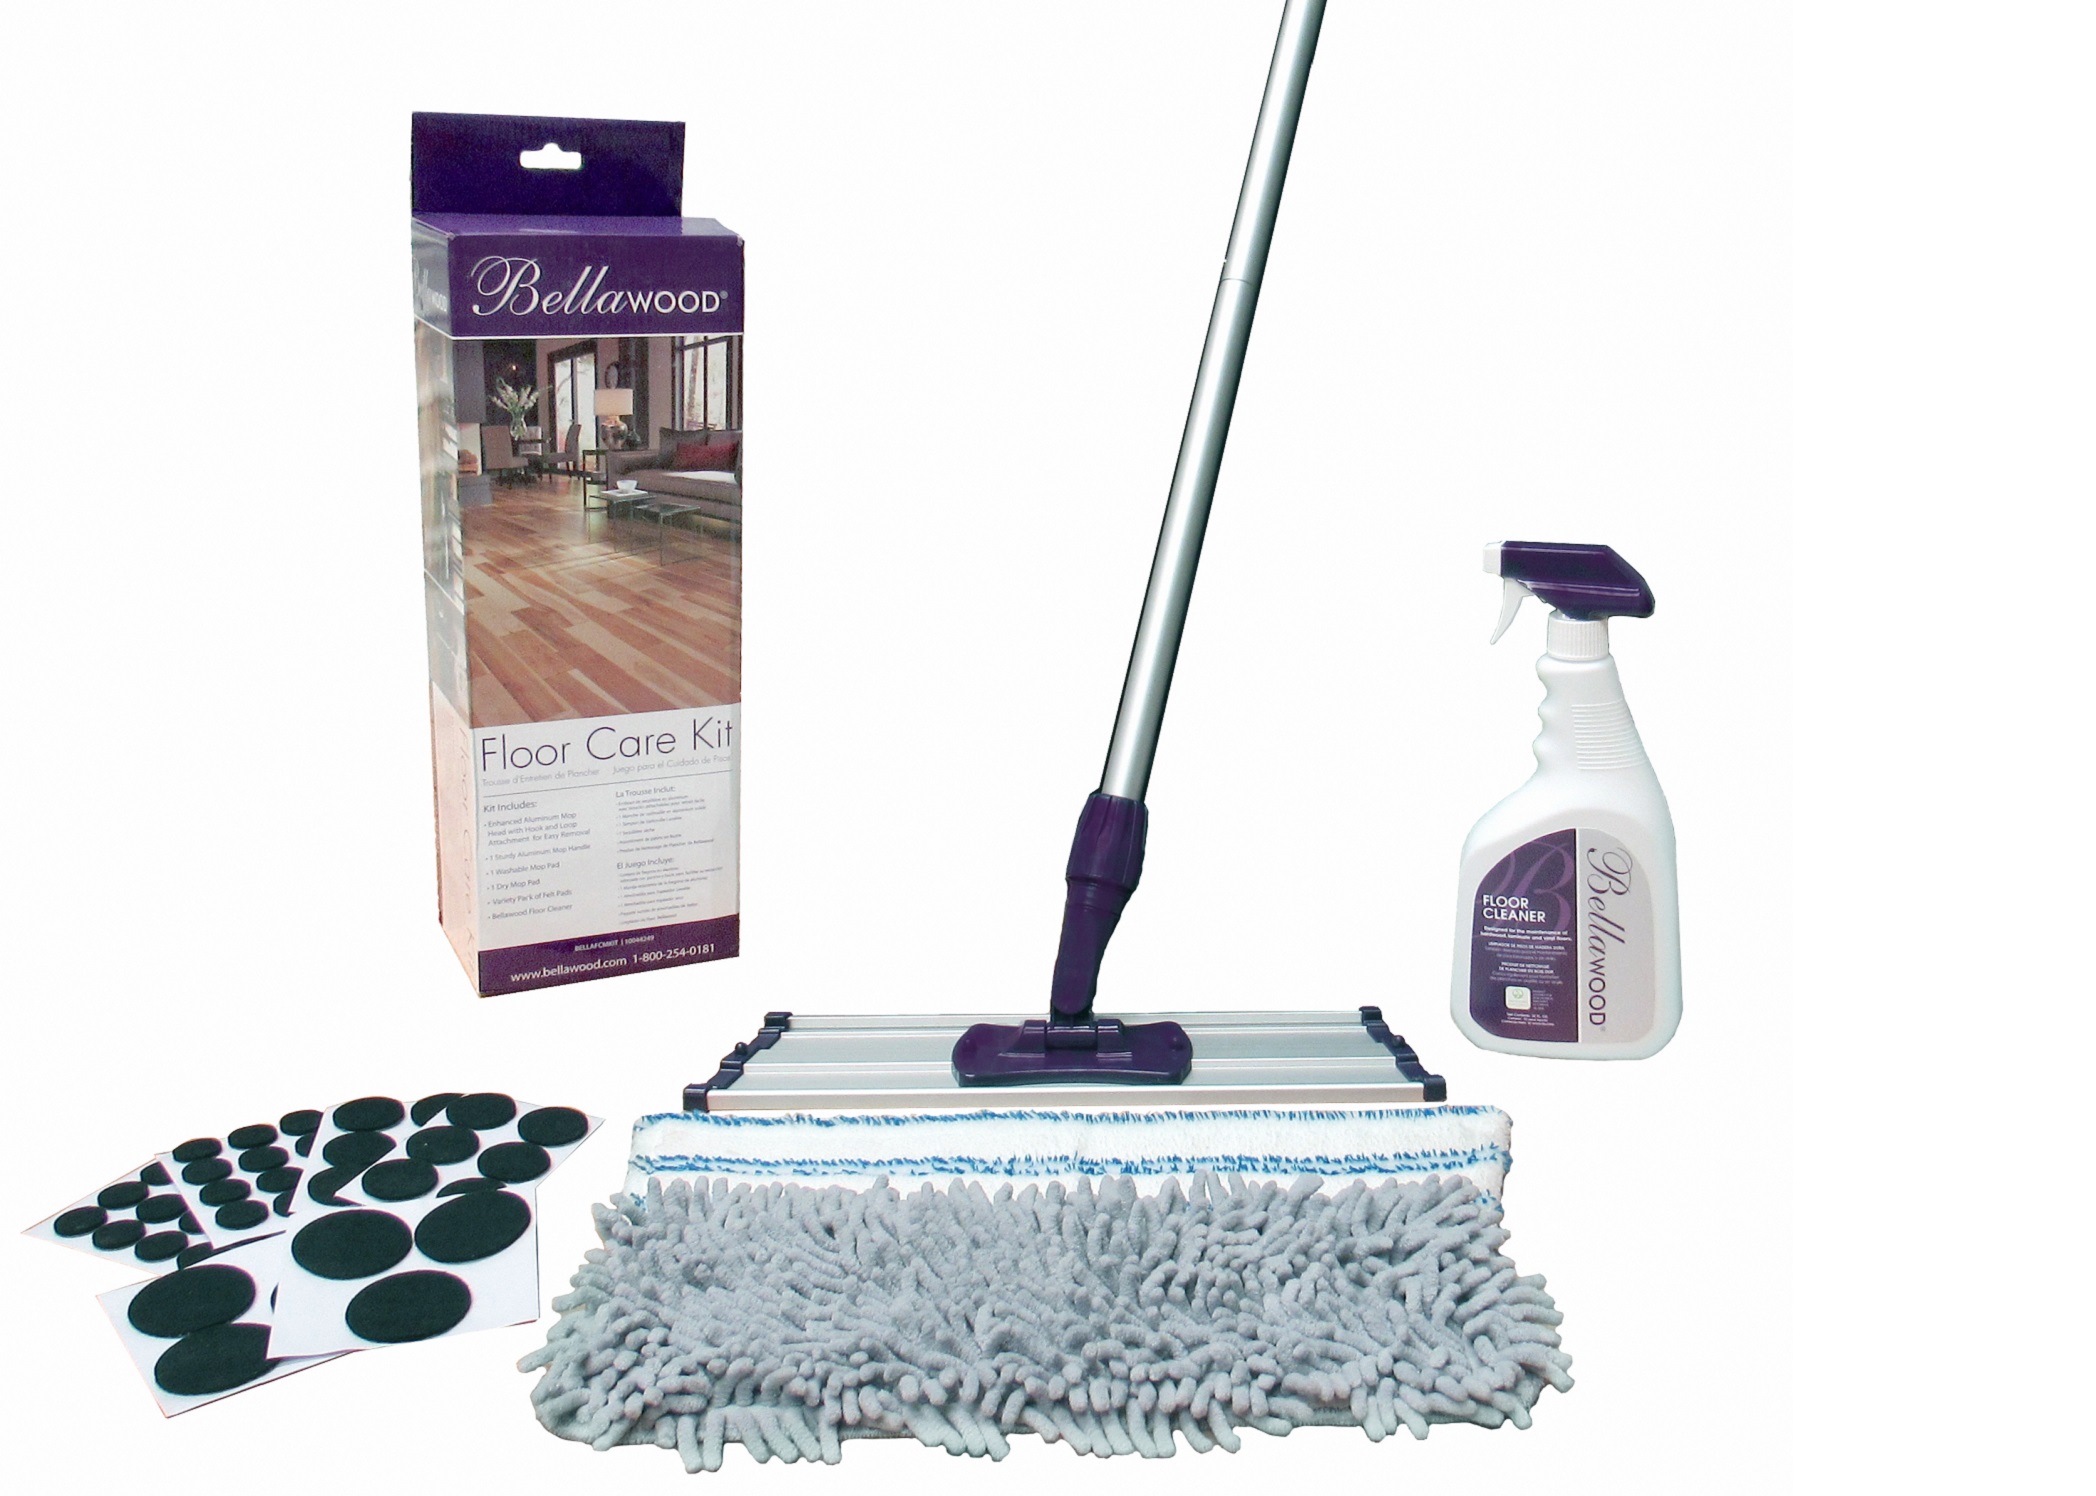 bellawood floor care kit showing mop and spray bottle